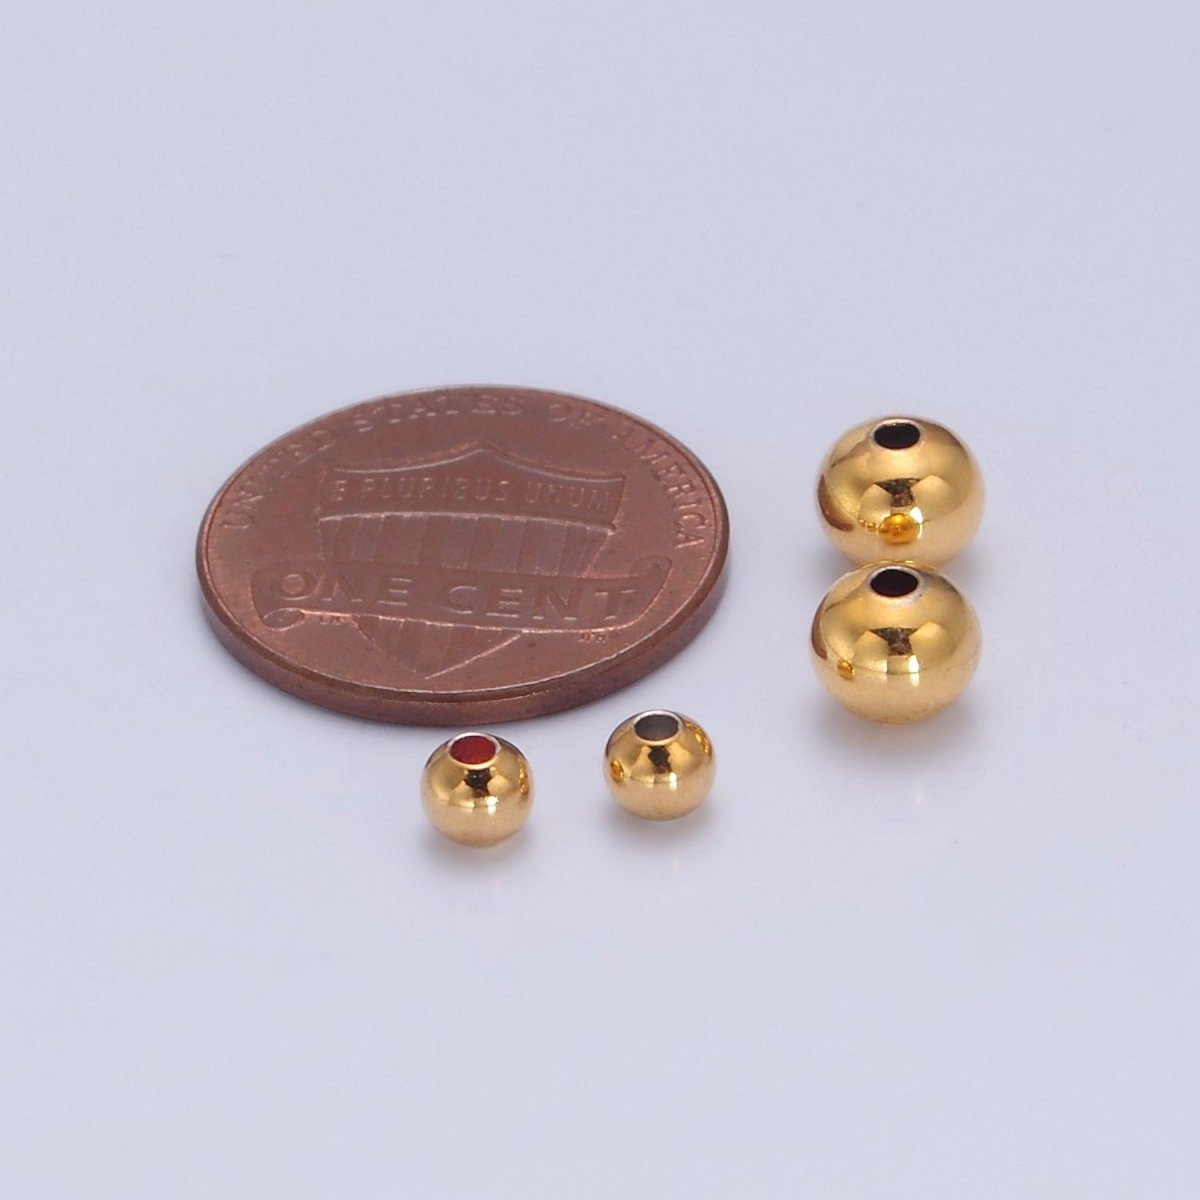 OS 4mm / 6mm 24K Gold Filled Beads. Gold Spacer Beads, Gold Spacer Ball Bracelet Connectors, Wholesale Jewelry Supplier L-744 L-745 - DLUXCA